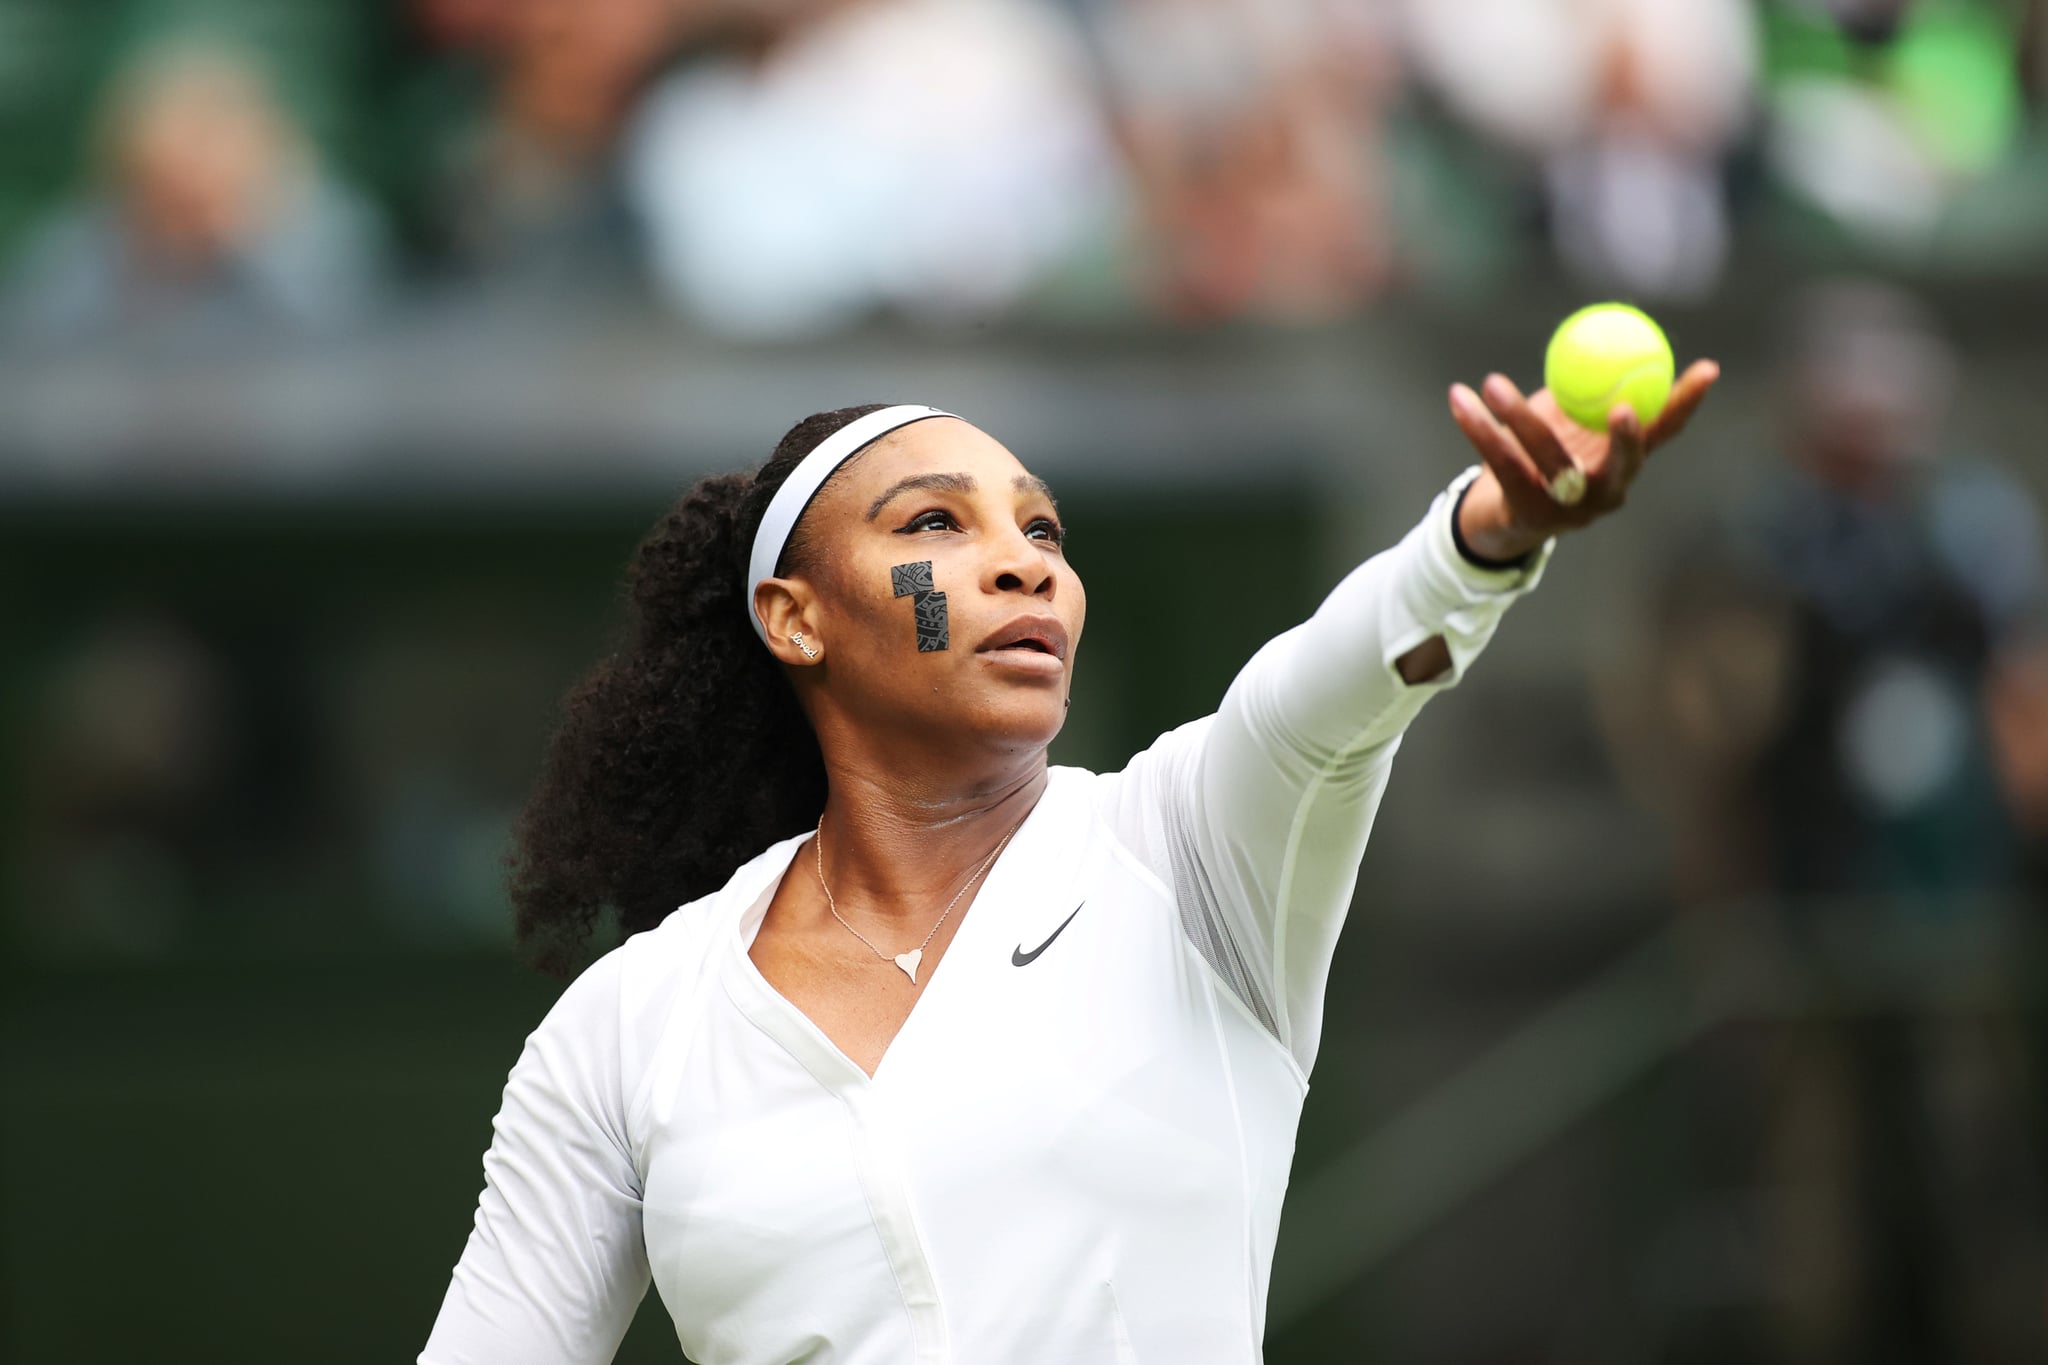 Serena Williams serves during the women's singles first round match between Serena Williams of the United States and Harmony Tan of France at Wimbledon Tennis Championship in London, Britain, on June 28, 2022. (Photo by Li Ying/Xinhua via Getty Images)